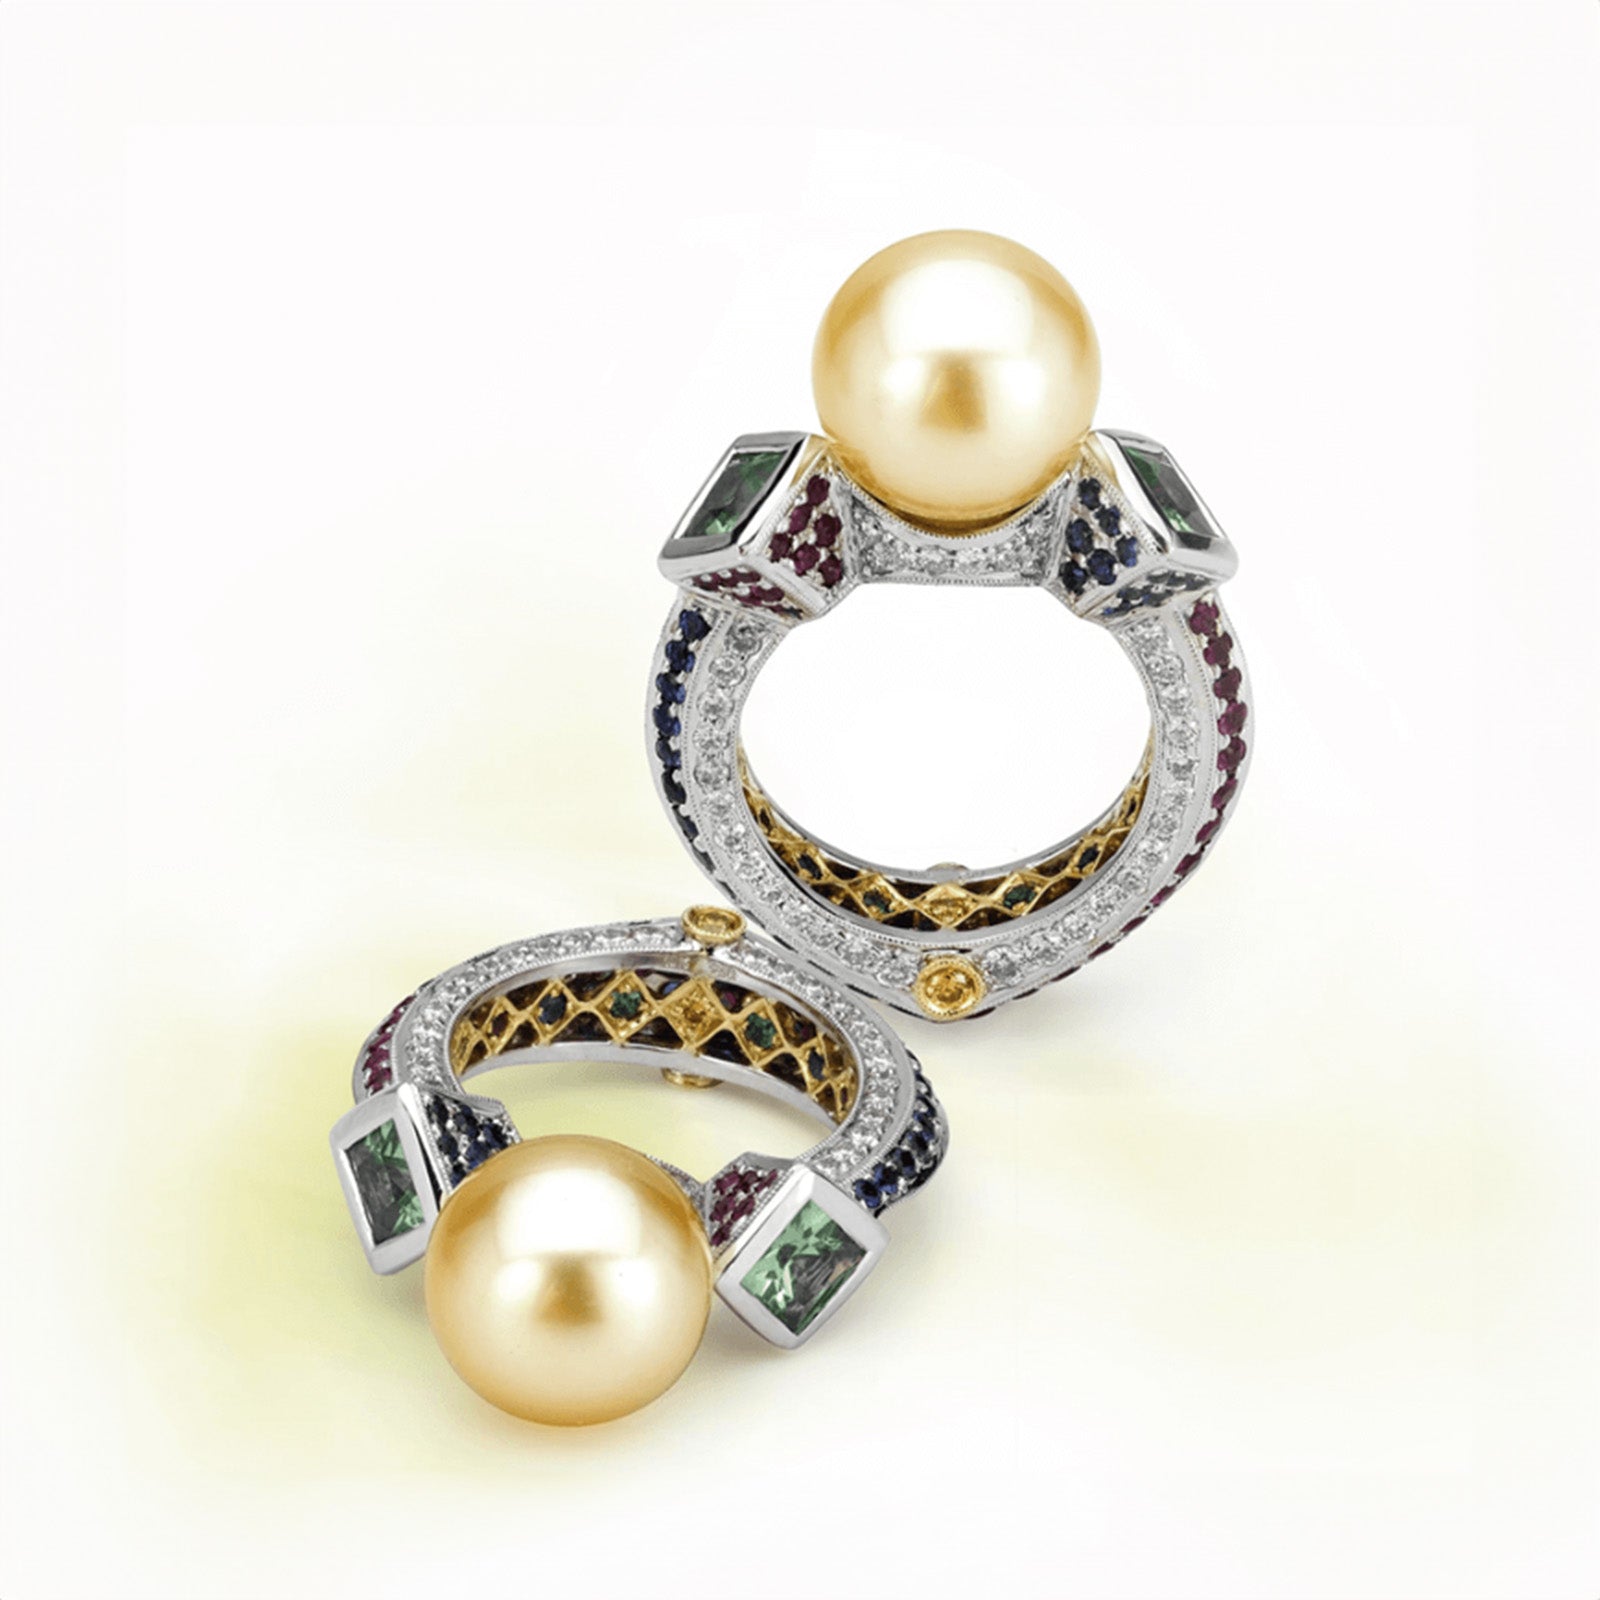 A pair of gold pearl rings on a white background. The rings are custom-designed by Garo Demirjian. 